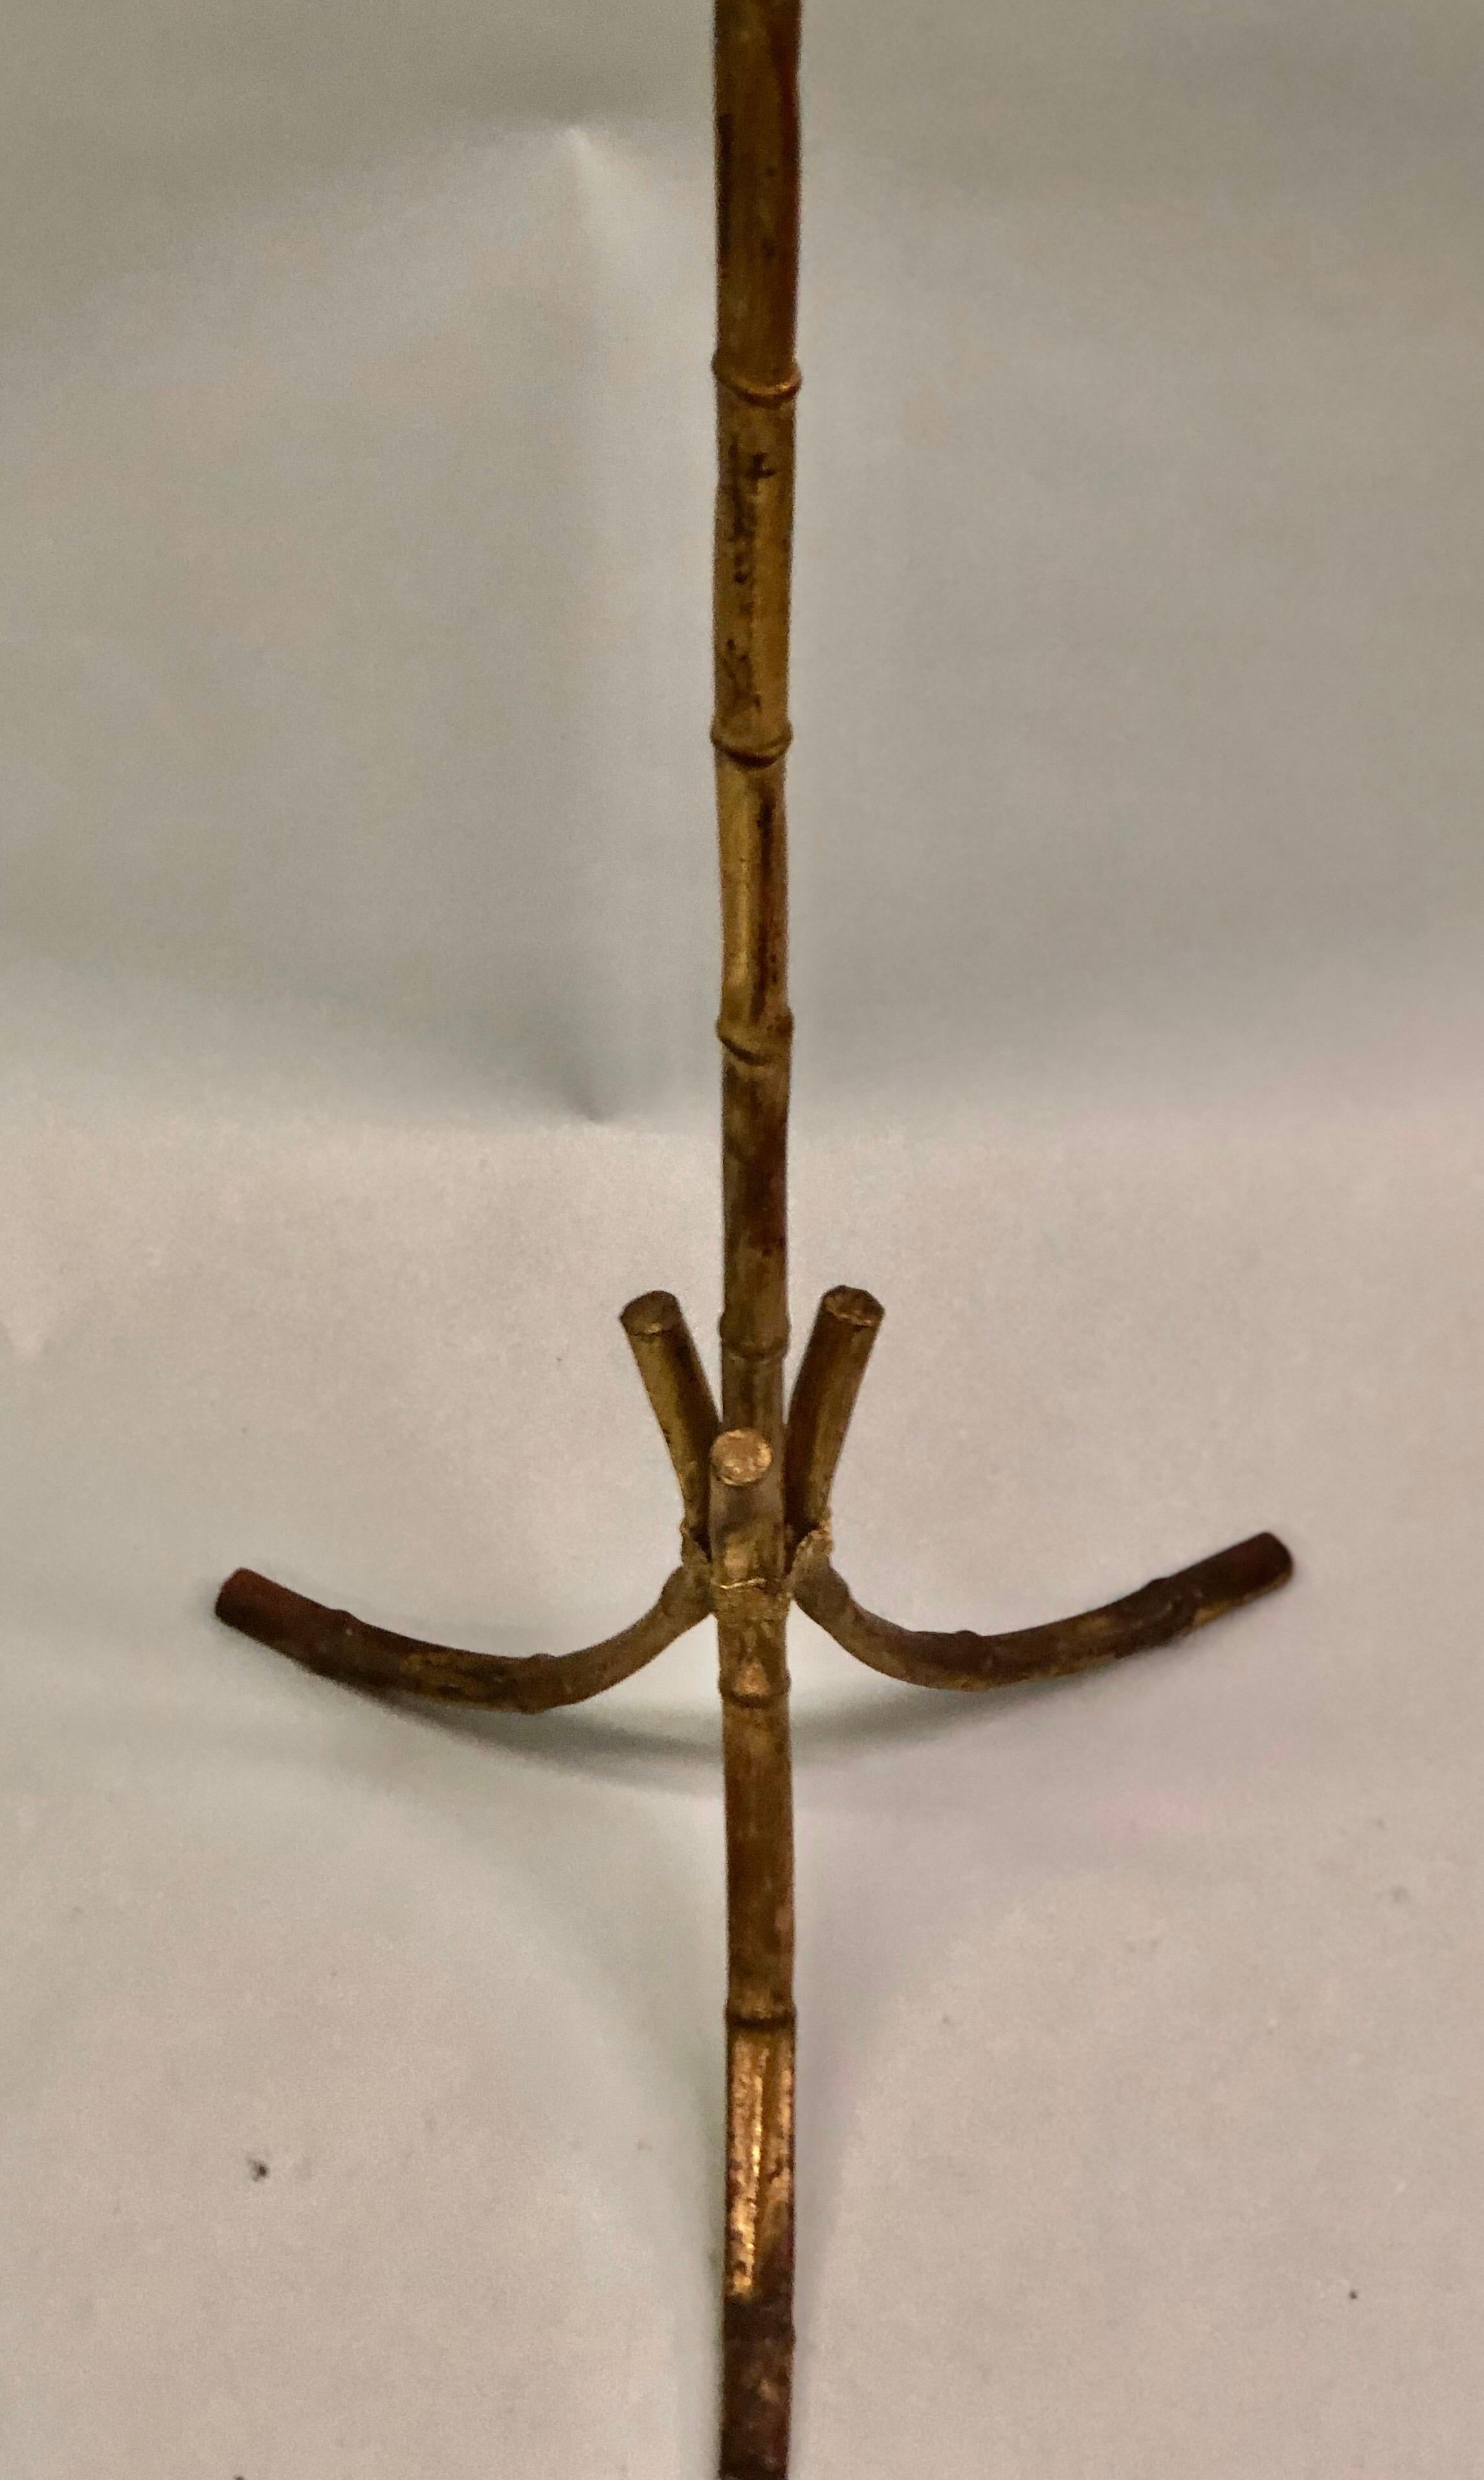 French Mid-Century Modern Gilt Iron Faux Bamboo Floor Lamp by Maison Baguès 1940 In Good Condition For Sale In New York, NY